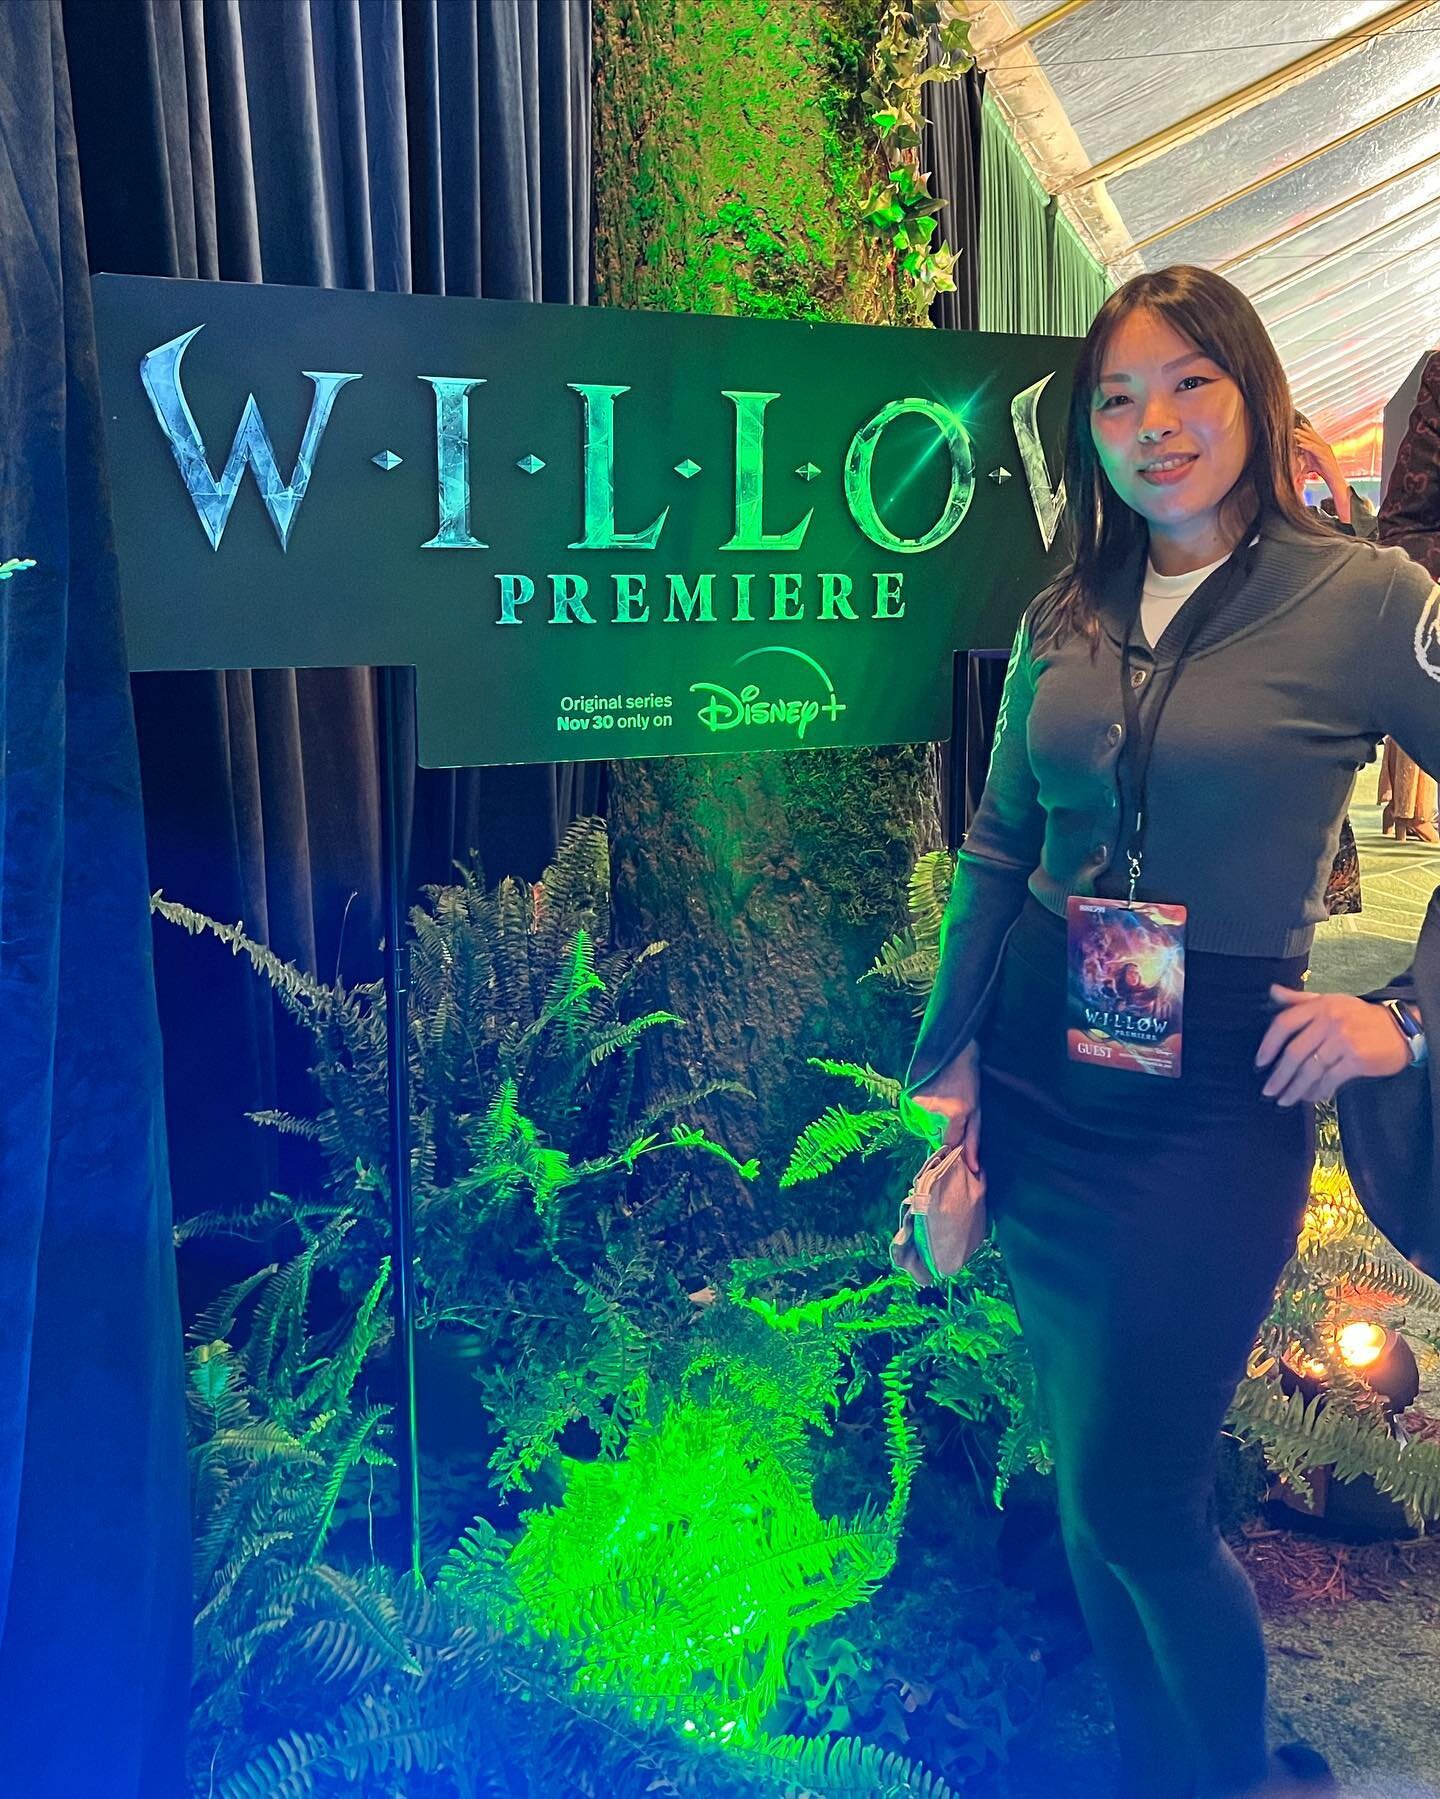 I&rsquo;m glad I re-watched Willow a couple of weeks ago to remind myself how much I like the story and characters. Excited to see the adventure continue in the @disneyplus series #willow #willowufgood